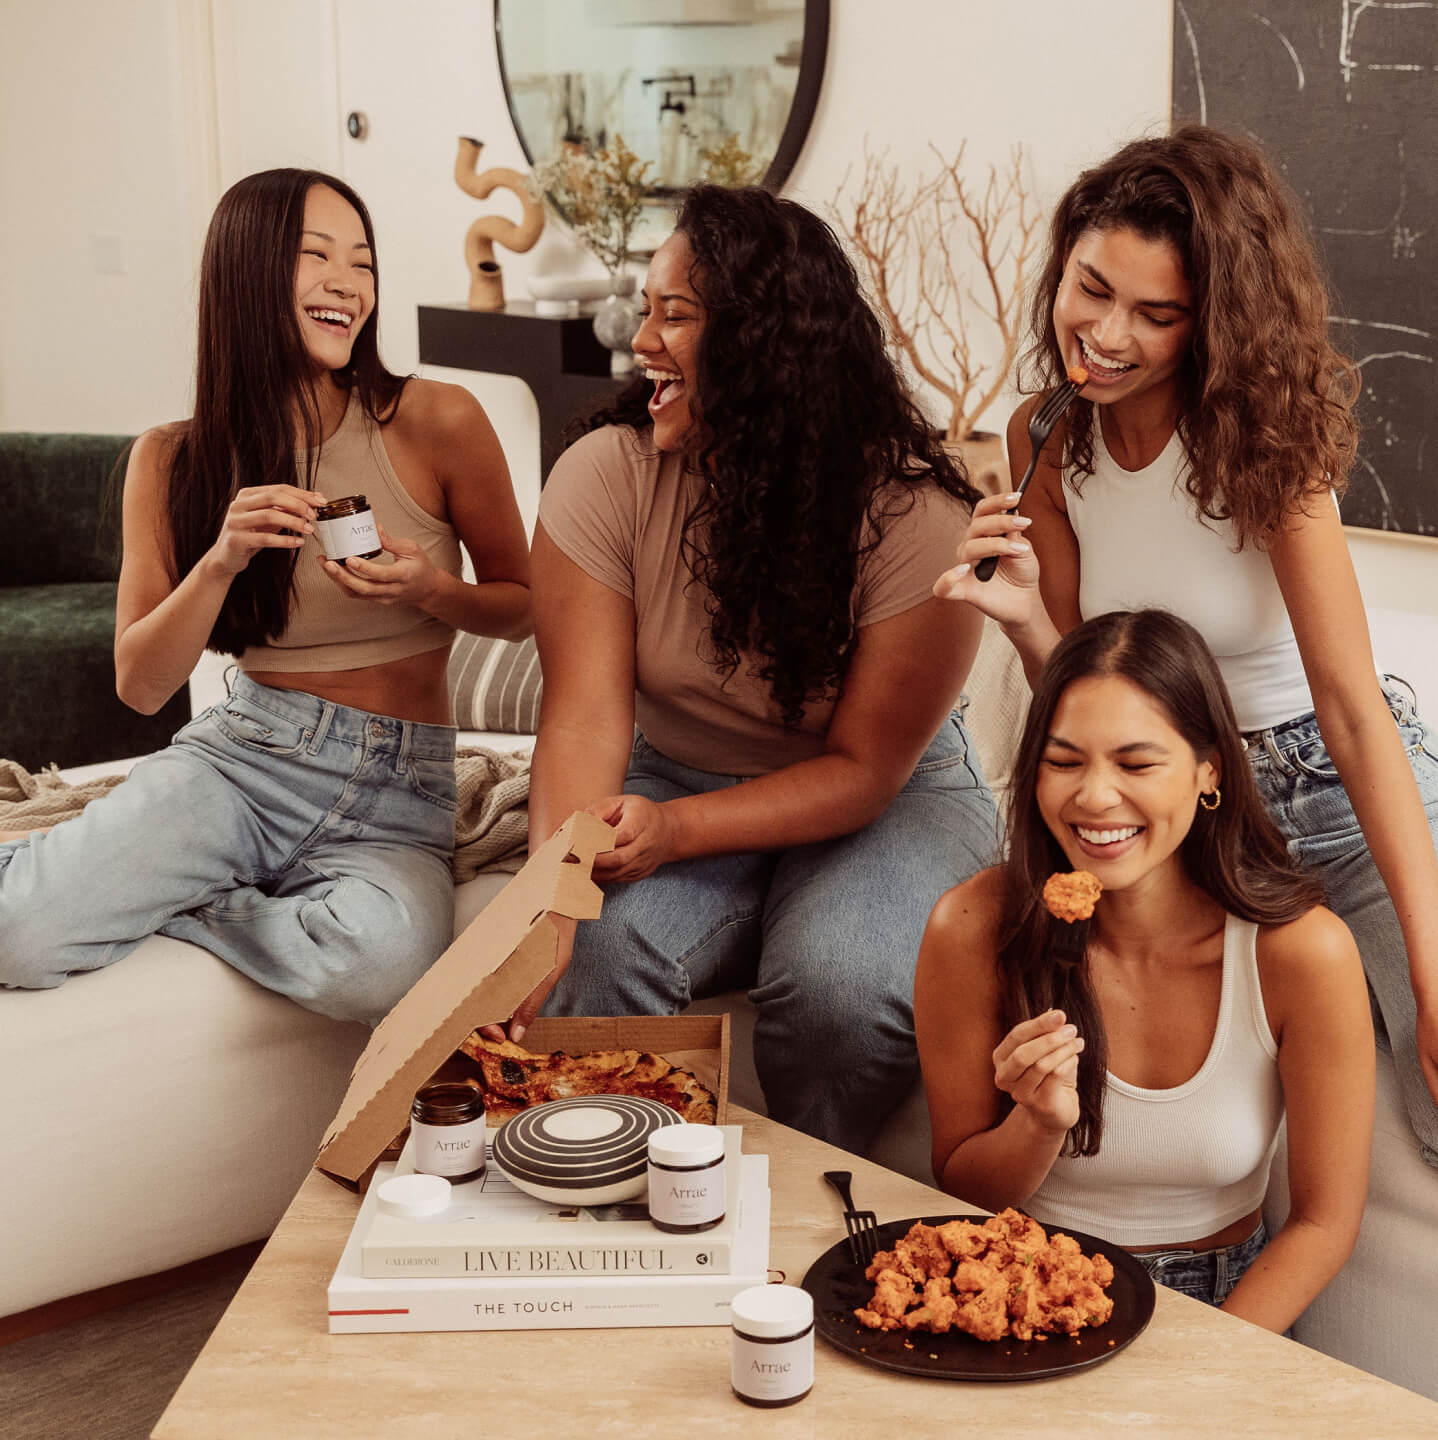  A group of 4 smiling women with dark hair, sit near each other in a living room, enjoying pizza and wings. One holds a bottle of arrae capsules